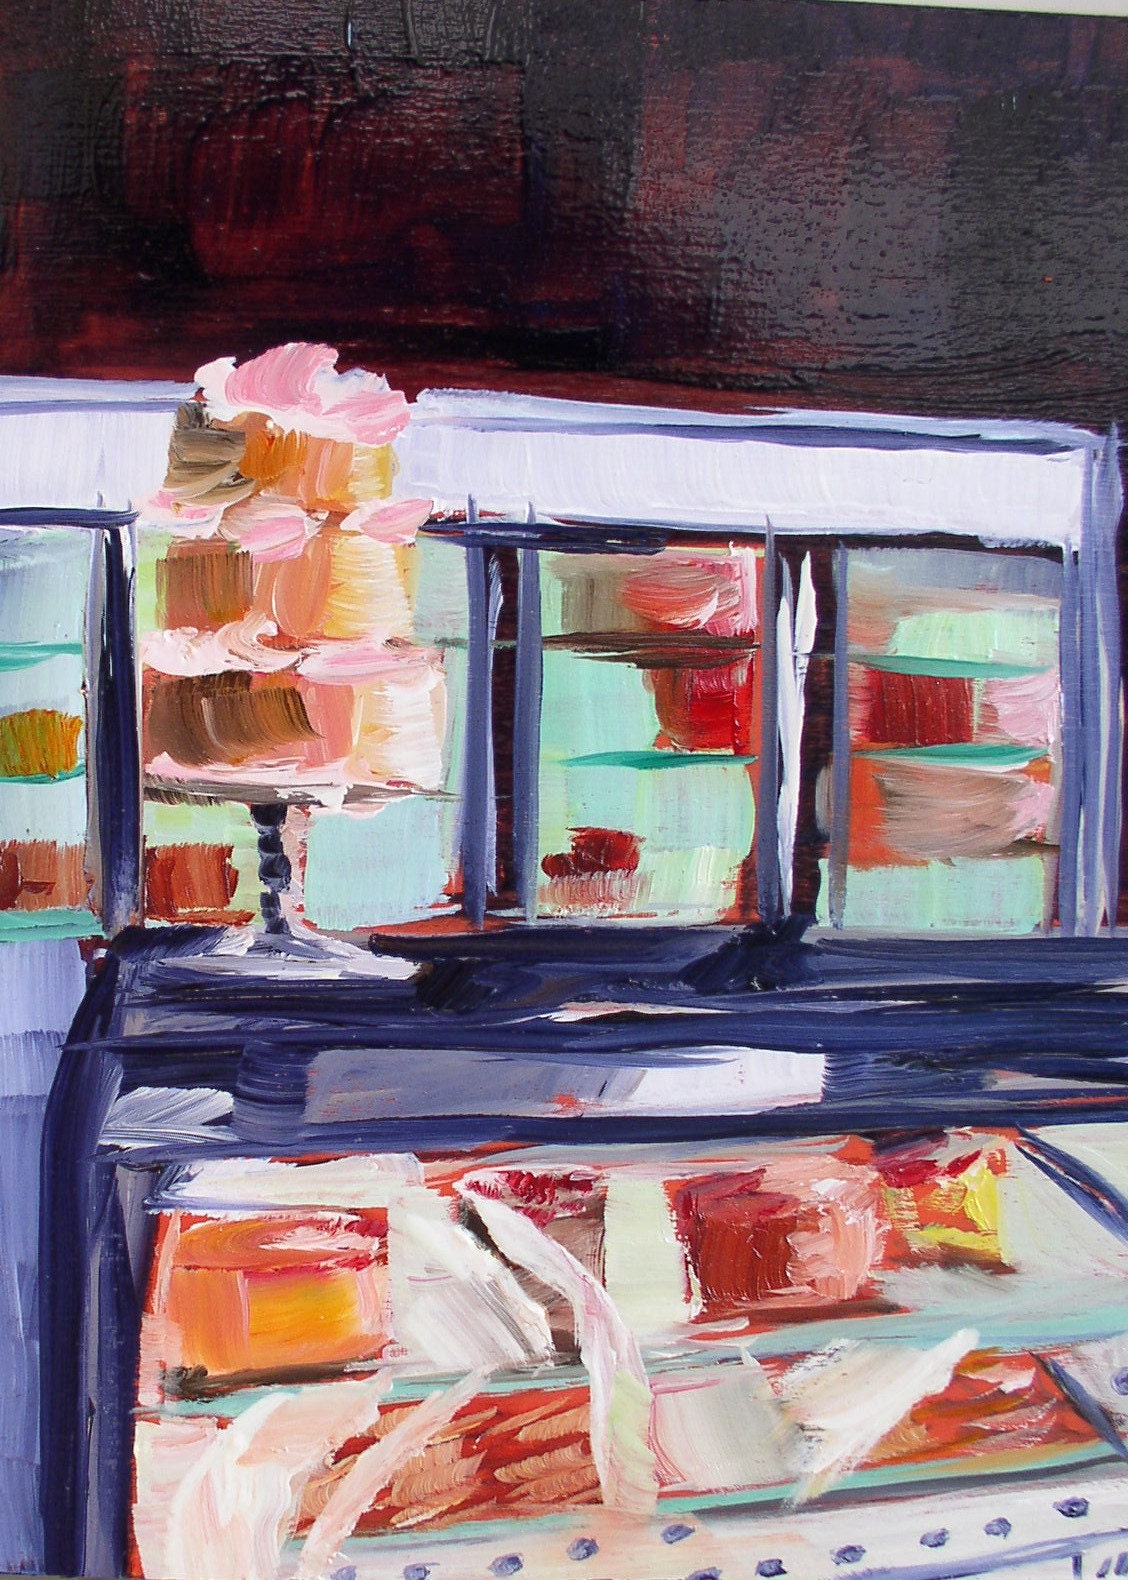 Pastry Counter with Cake Original Oil Painting Daily painting